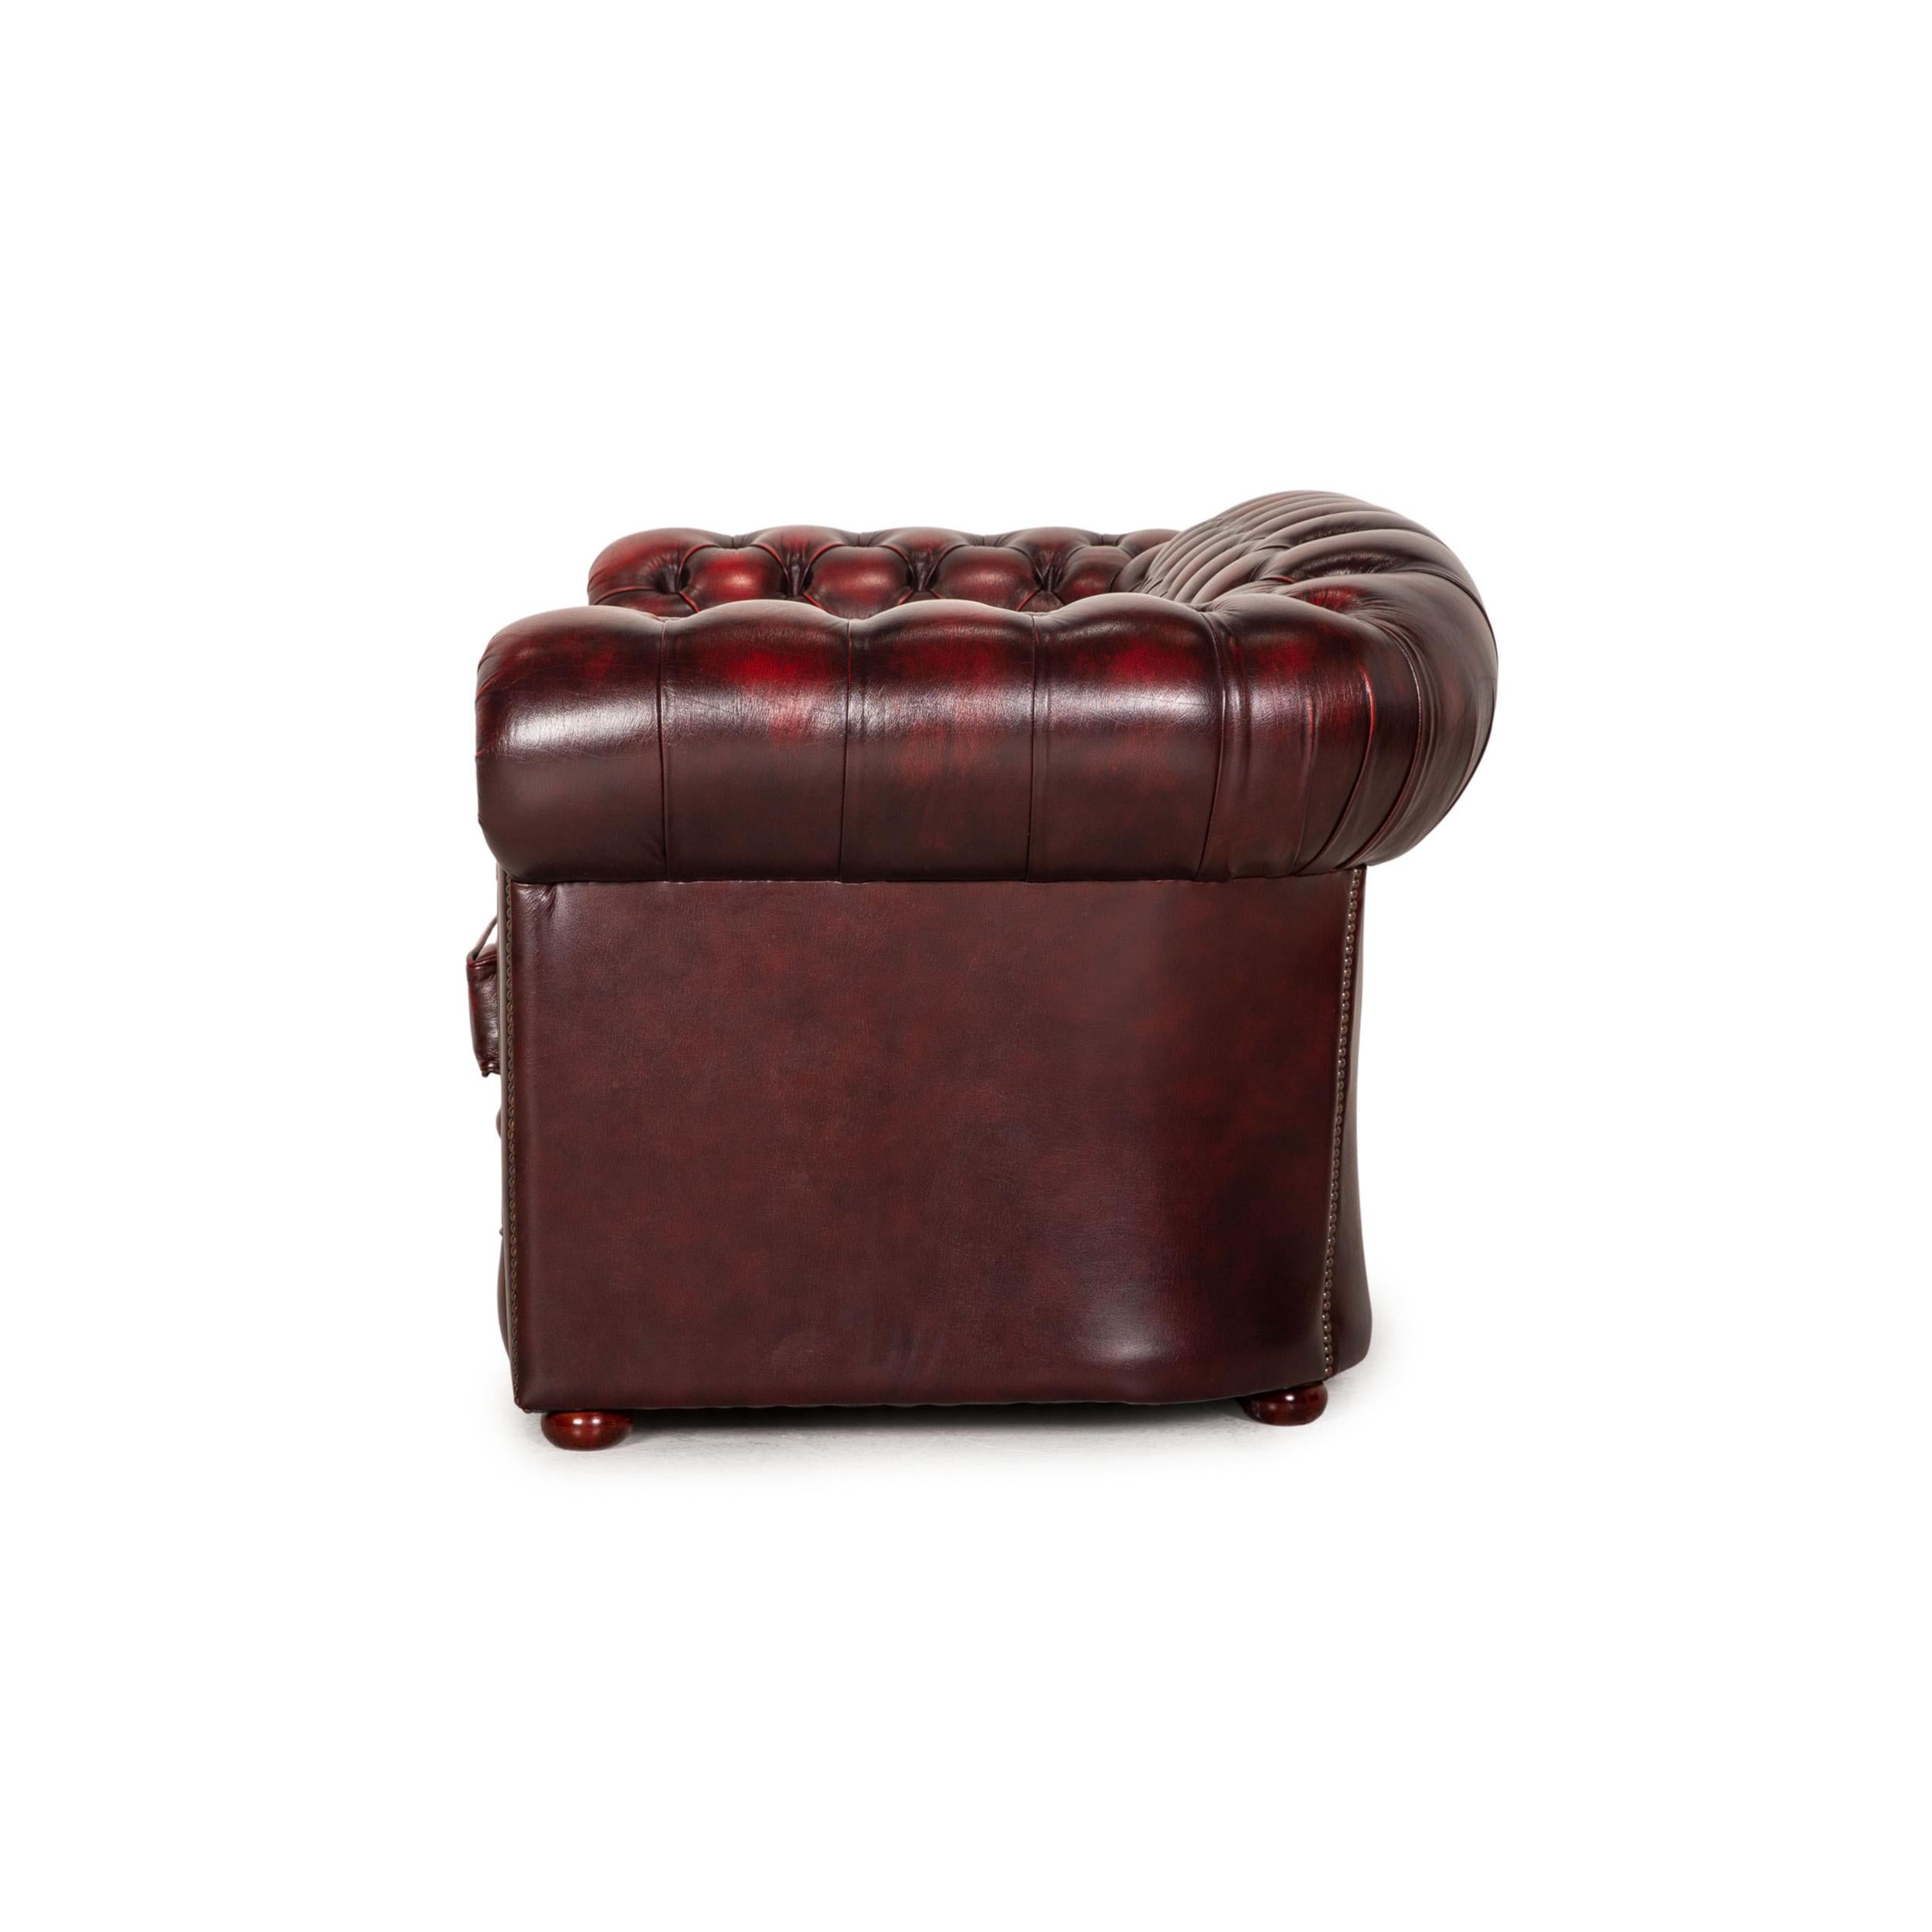 Chesterfield Tudor Leather Sofa Dark Red Two Seater Couch 3